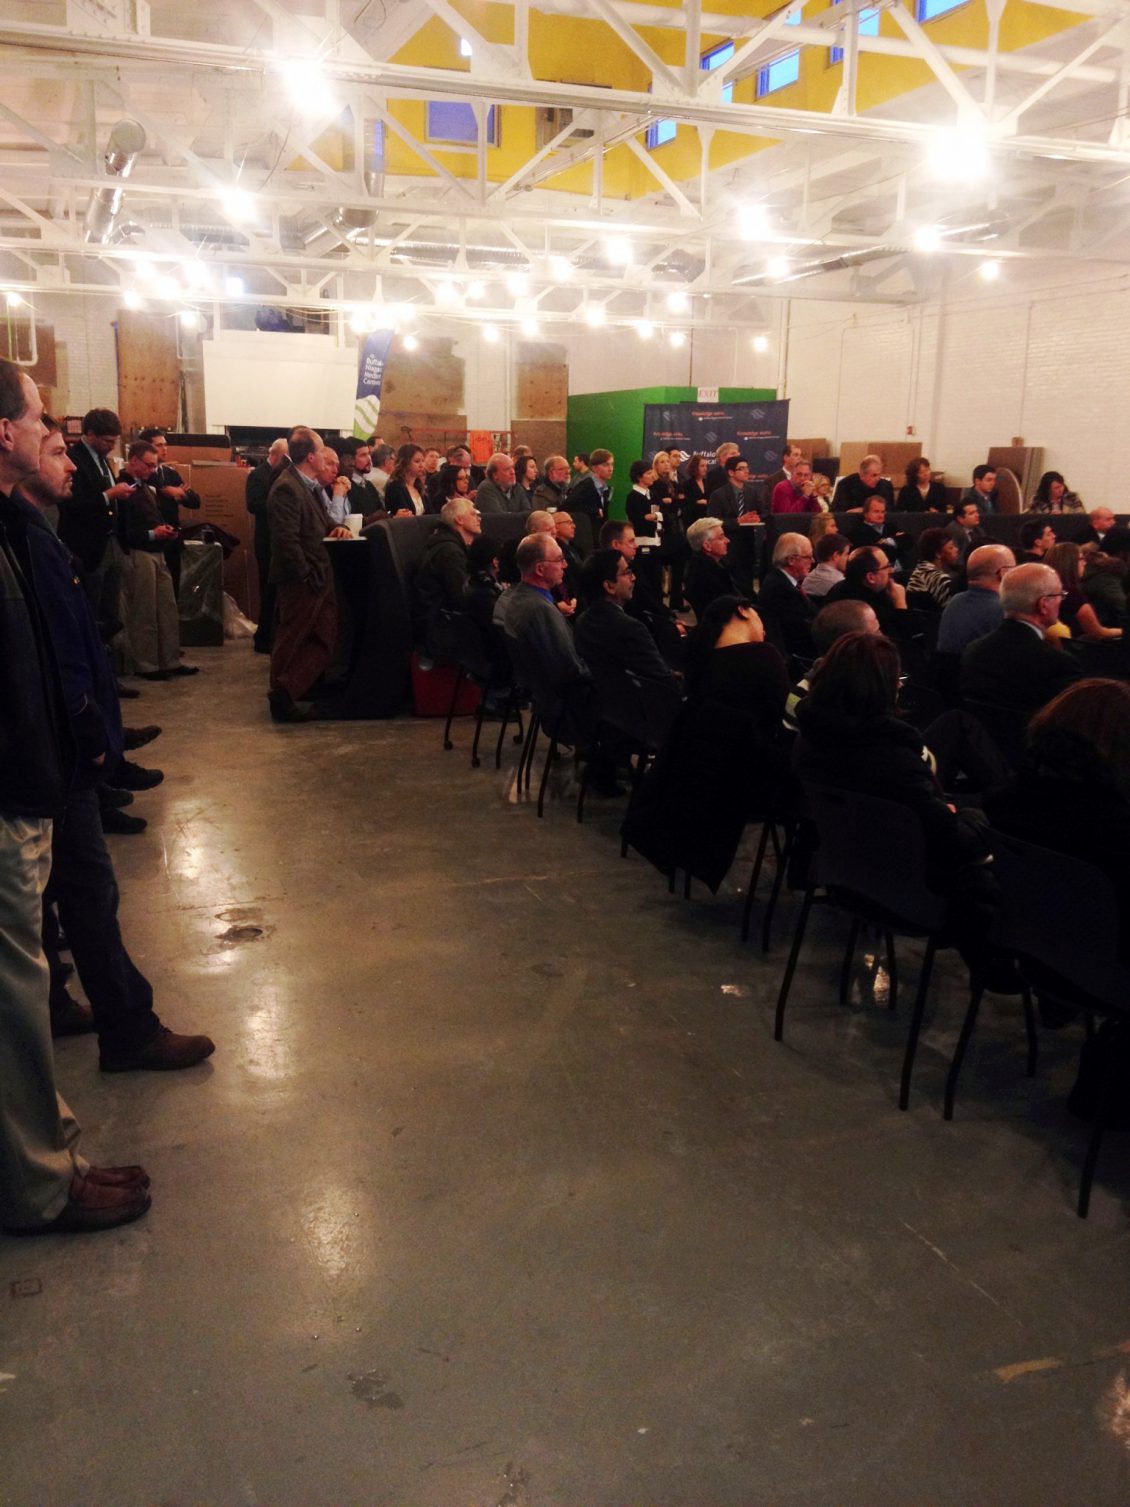 More than 200 People Come to Hear About 43North Business Competition in dig